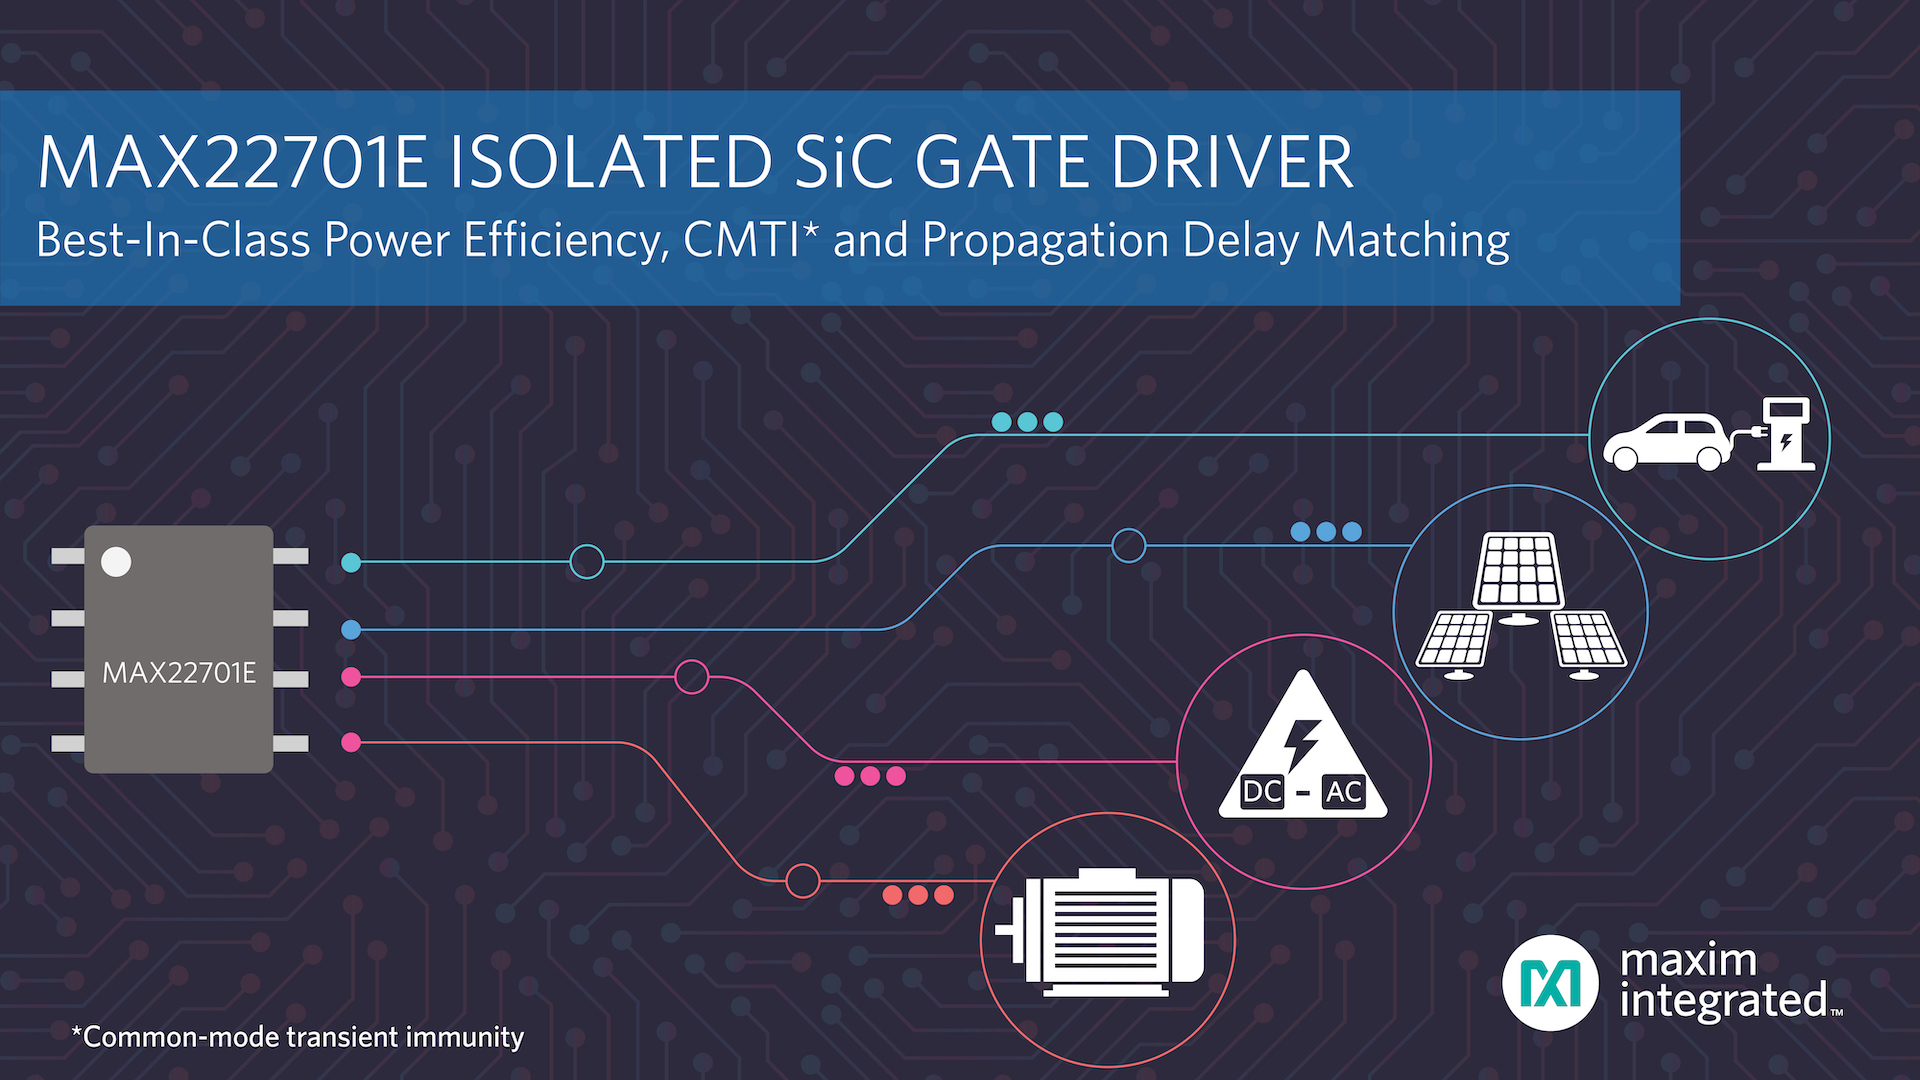 SiC Gate Driver Provides Best-in-Class Power Efficiency